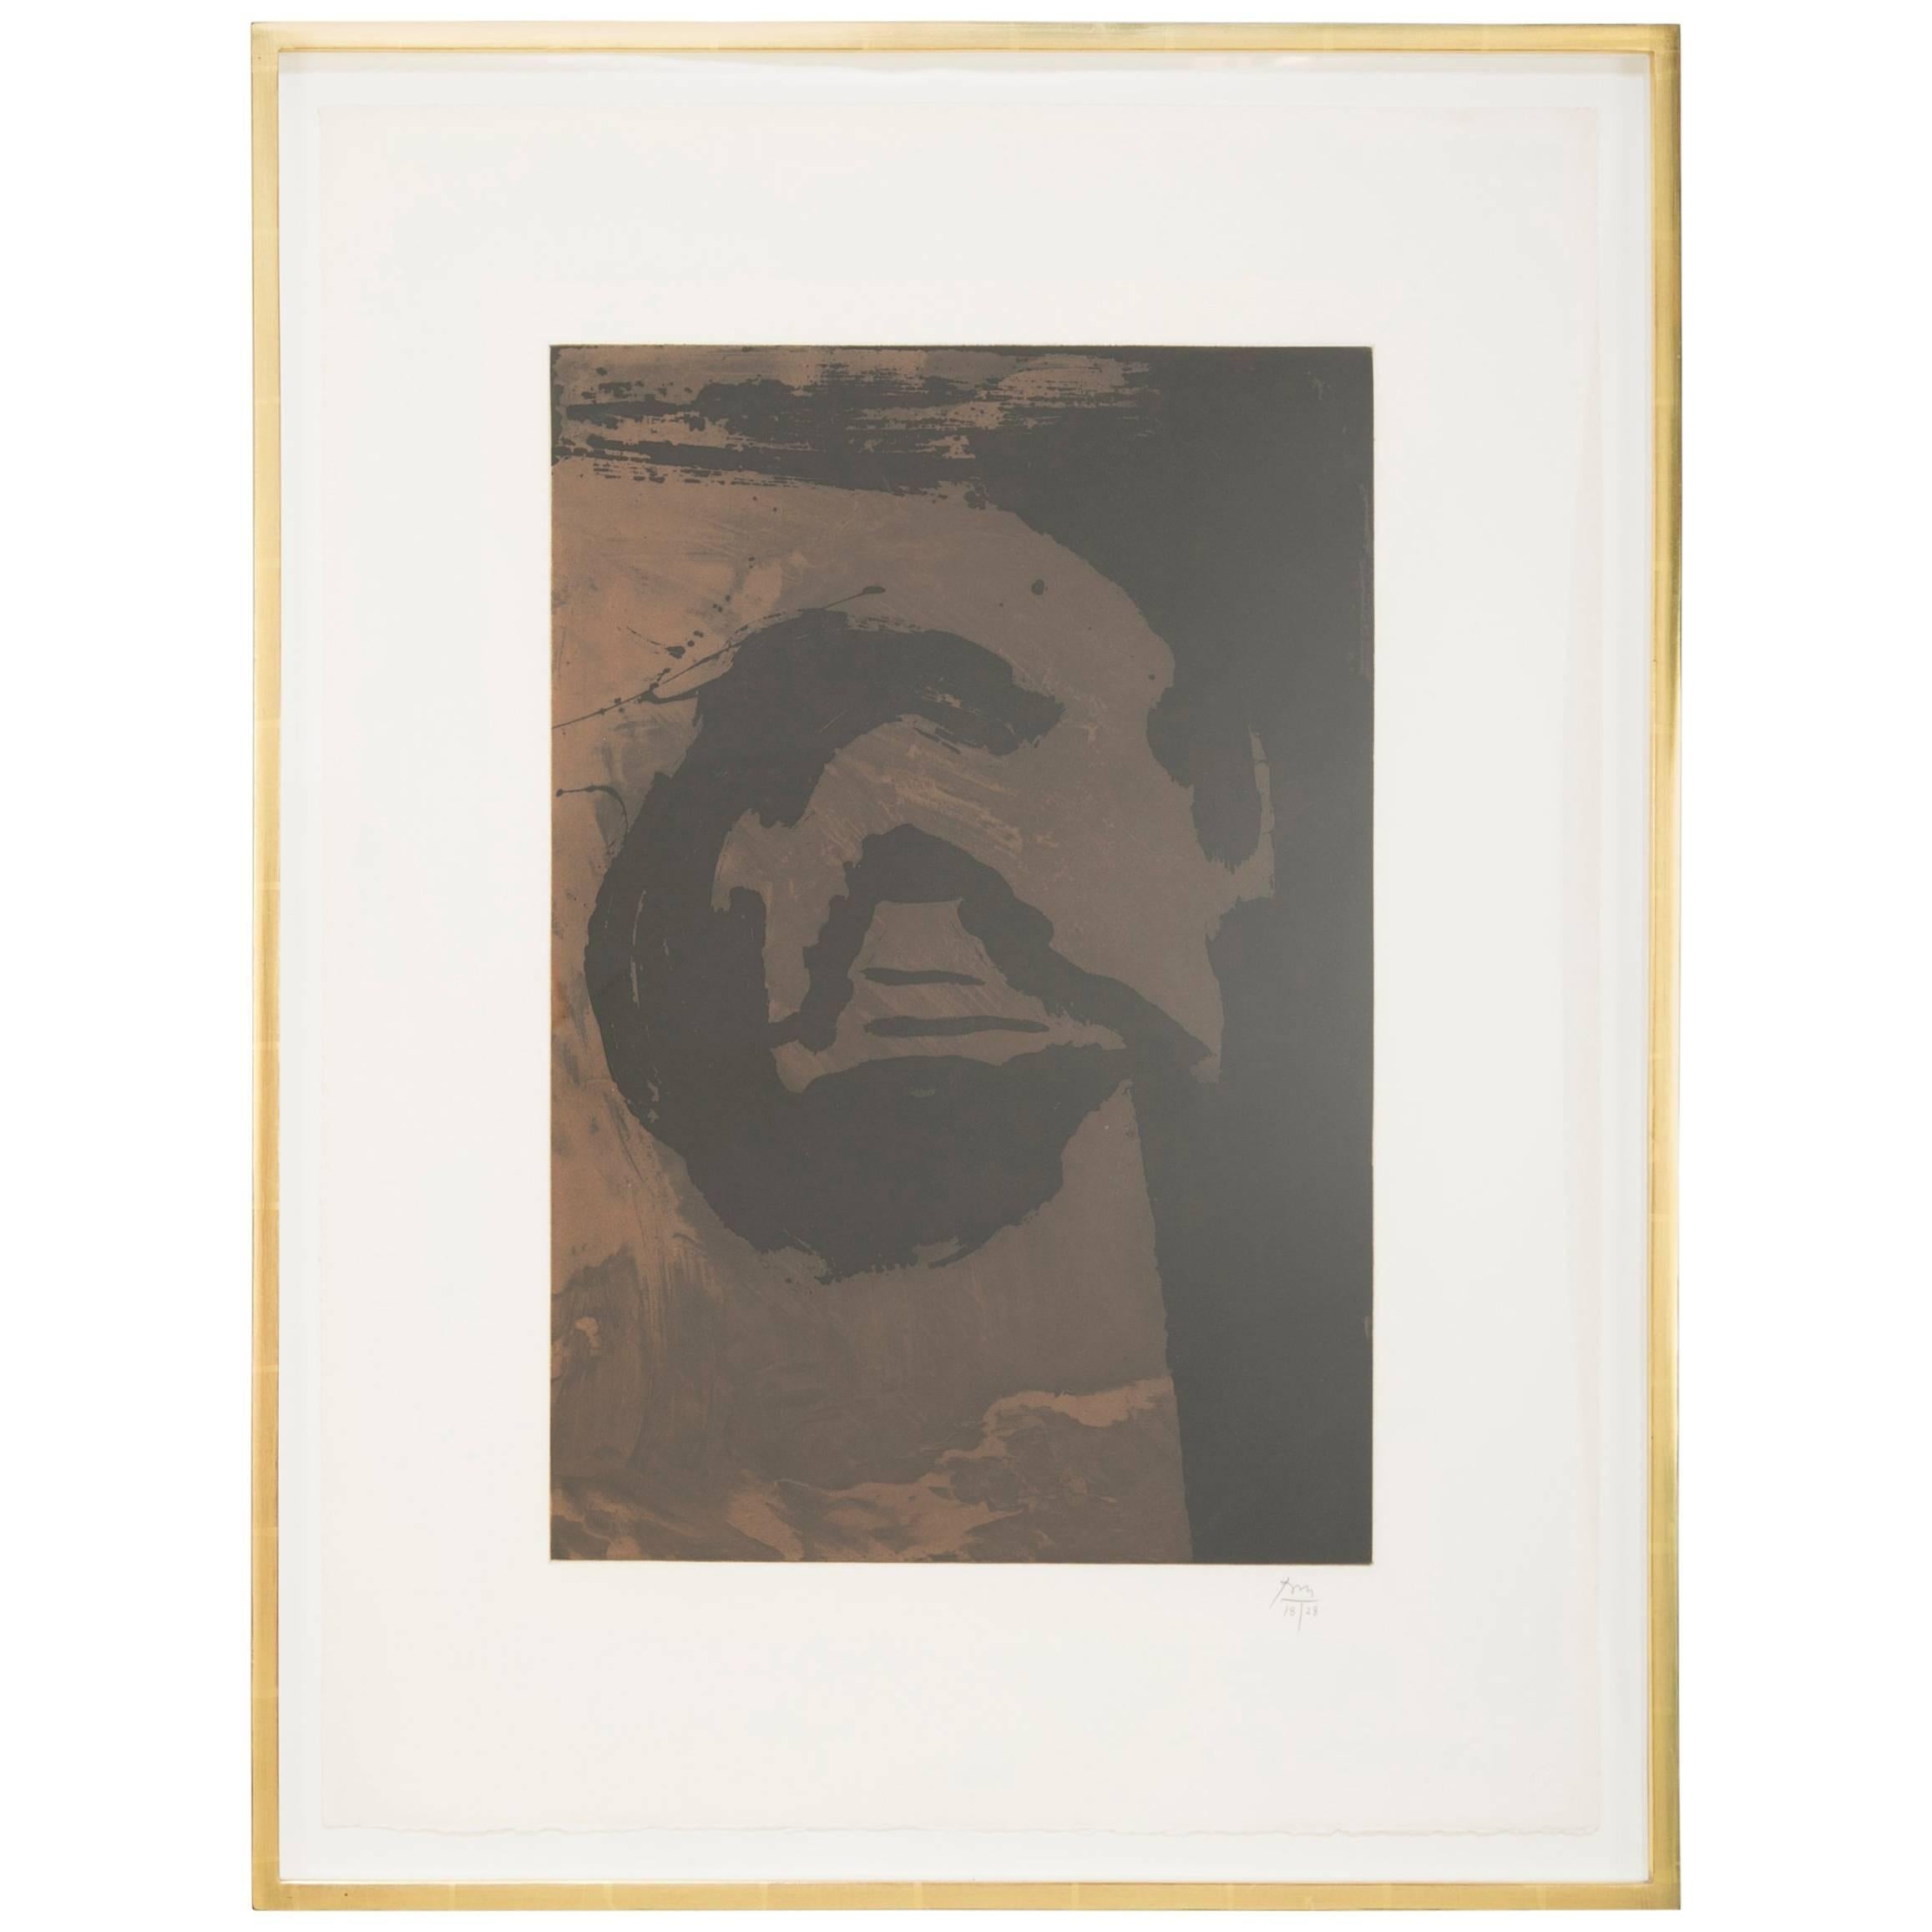 "Primal Sign V Copper"  Aquatint and Etching by Robert Motherwell